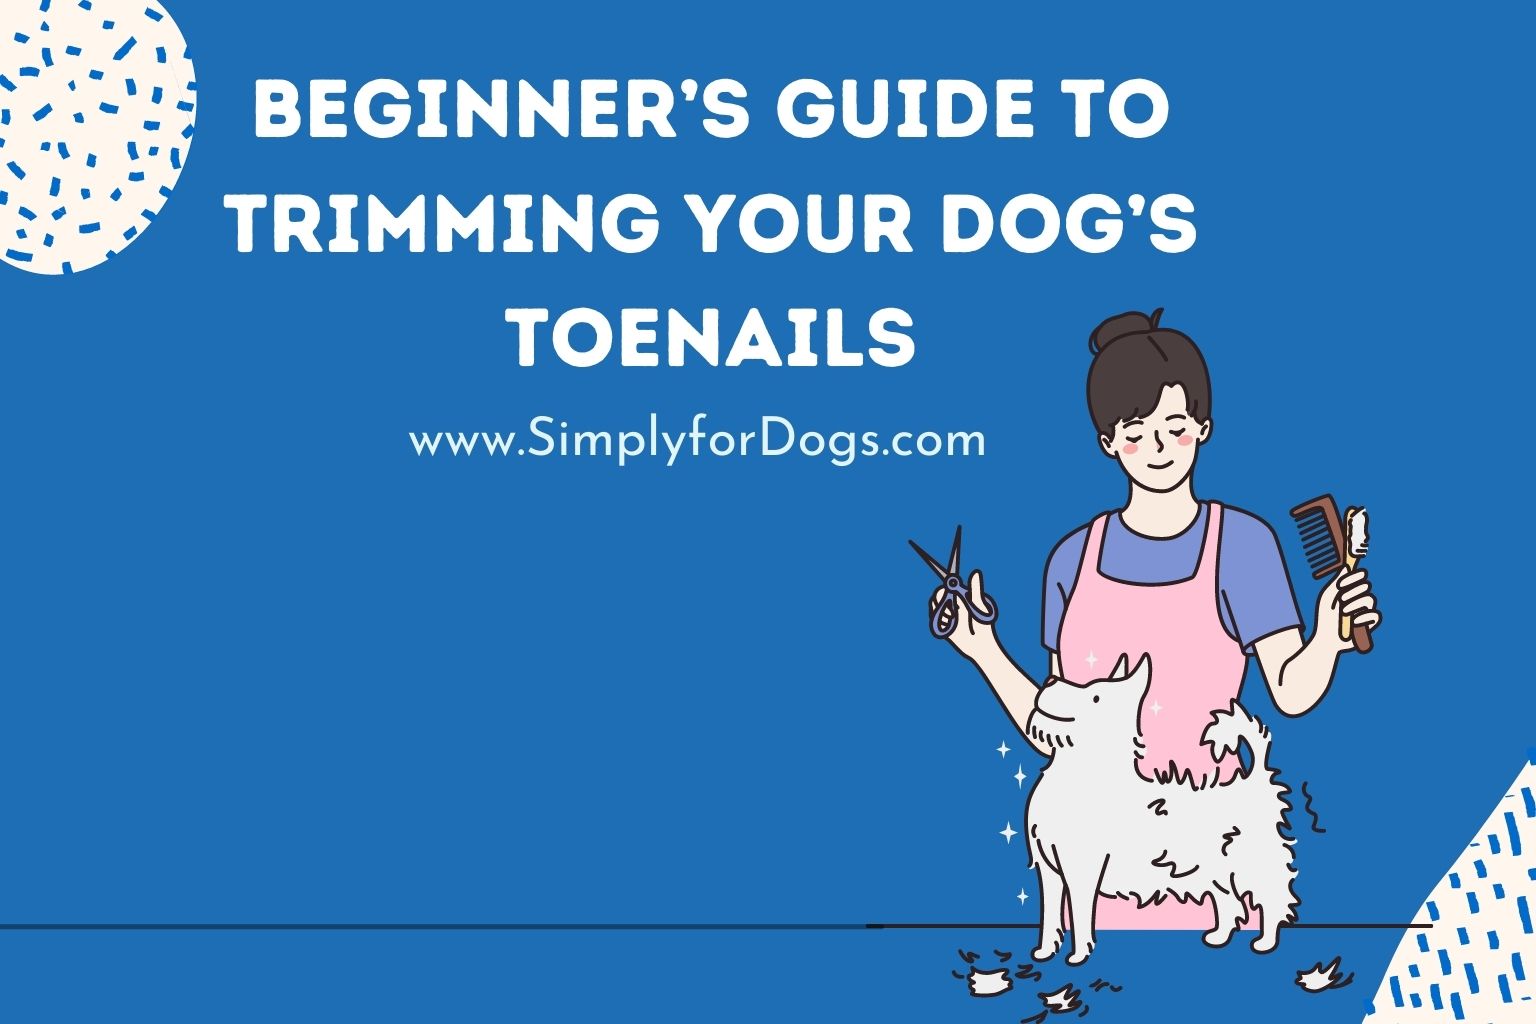 Beginner’s Guide to Trimming Your Dog’s Toenails